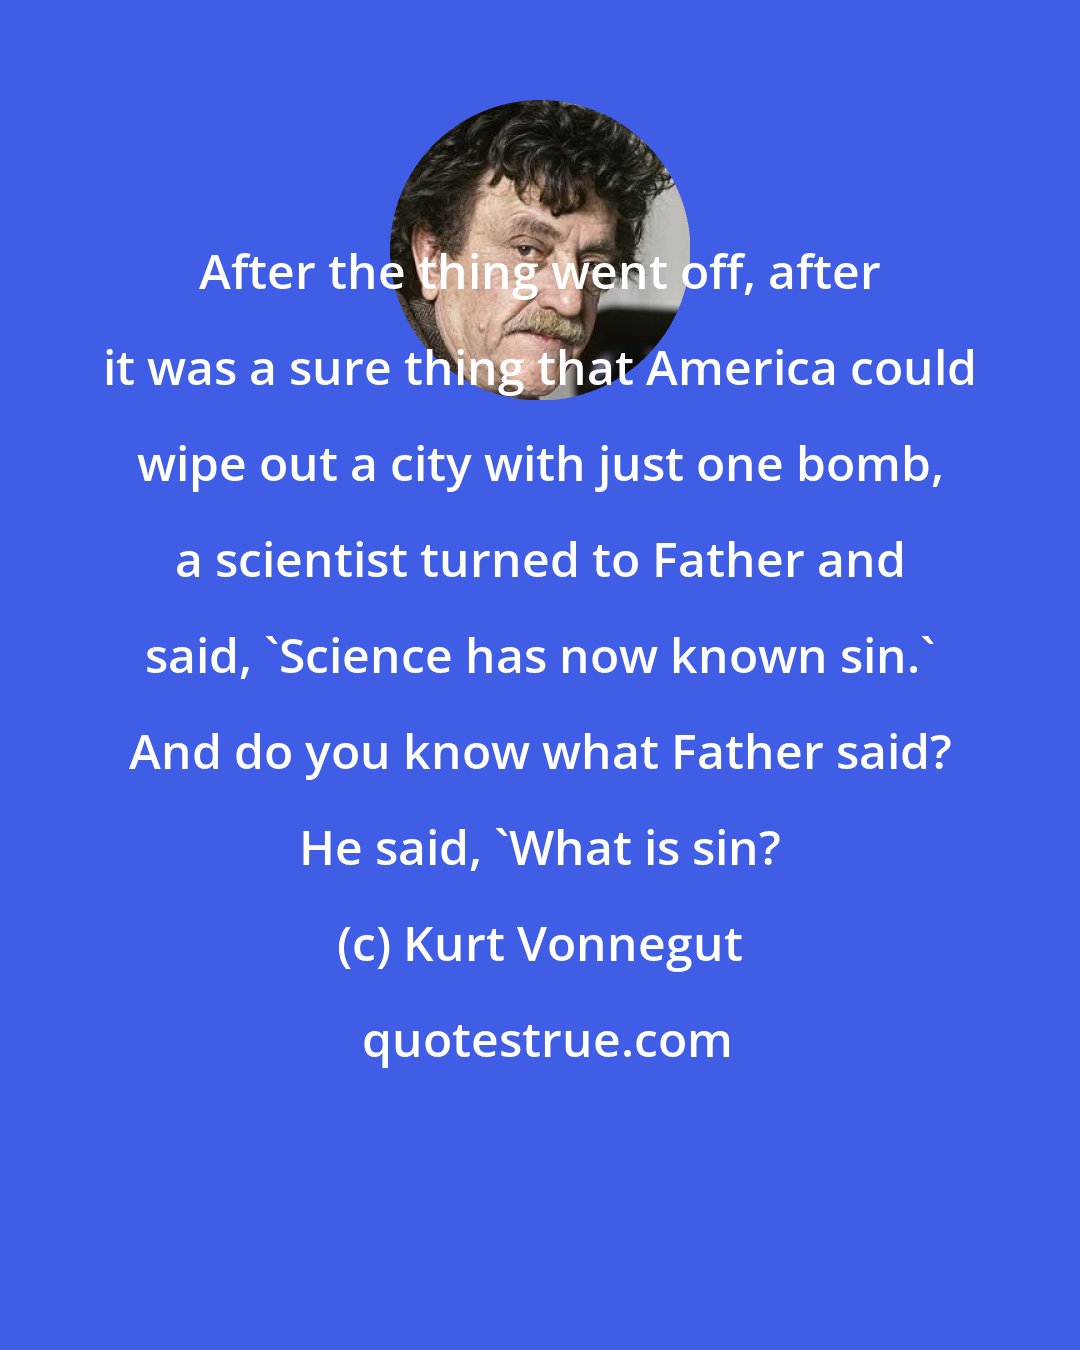 Kurt Vonnegut: After the thing went off, after it was a sure thing that America could wipe out a city with just one bomb, a scientist turned to Father and said, 'Science has now known sin.' And do you know what Father said? He said, 'What is sin?